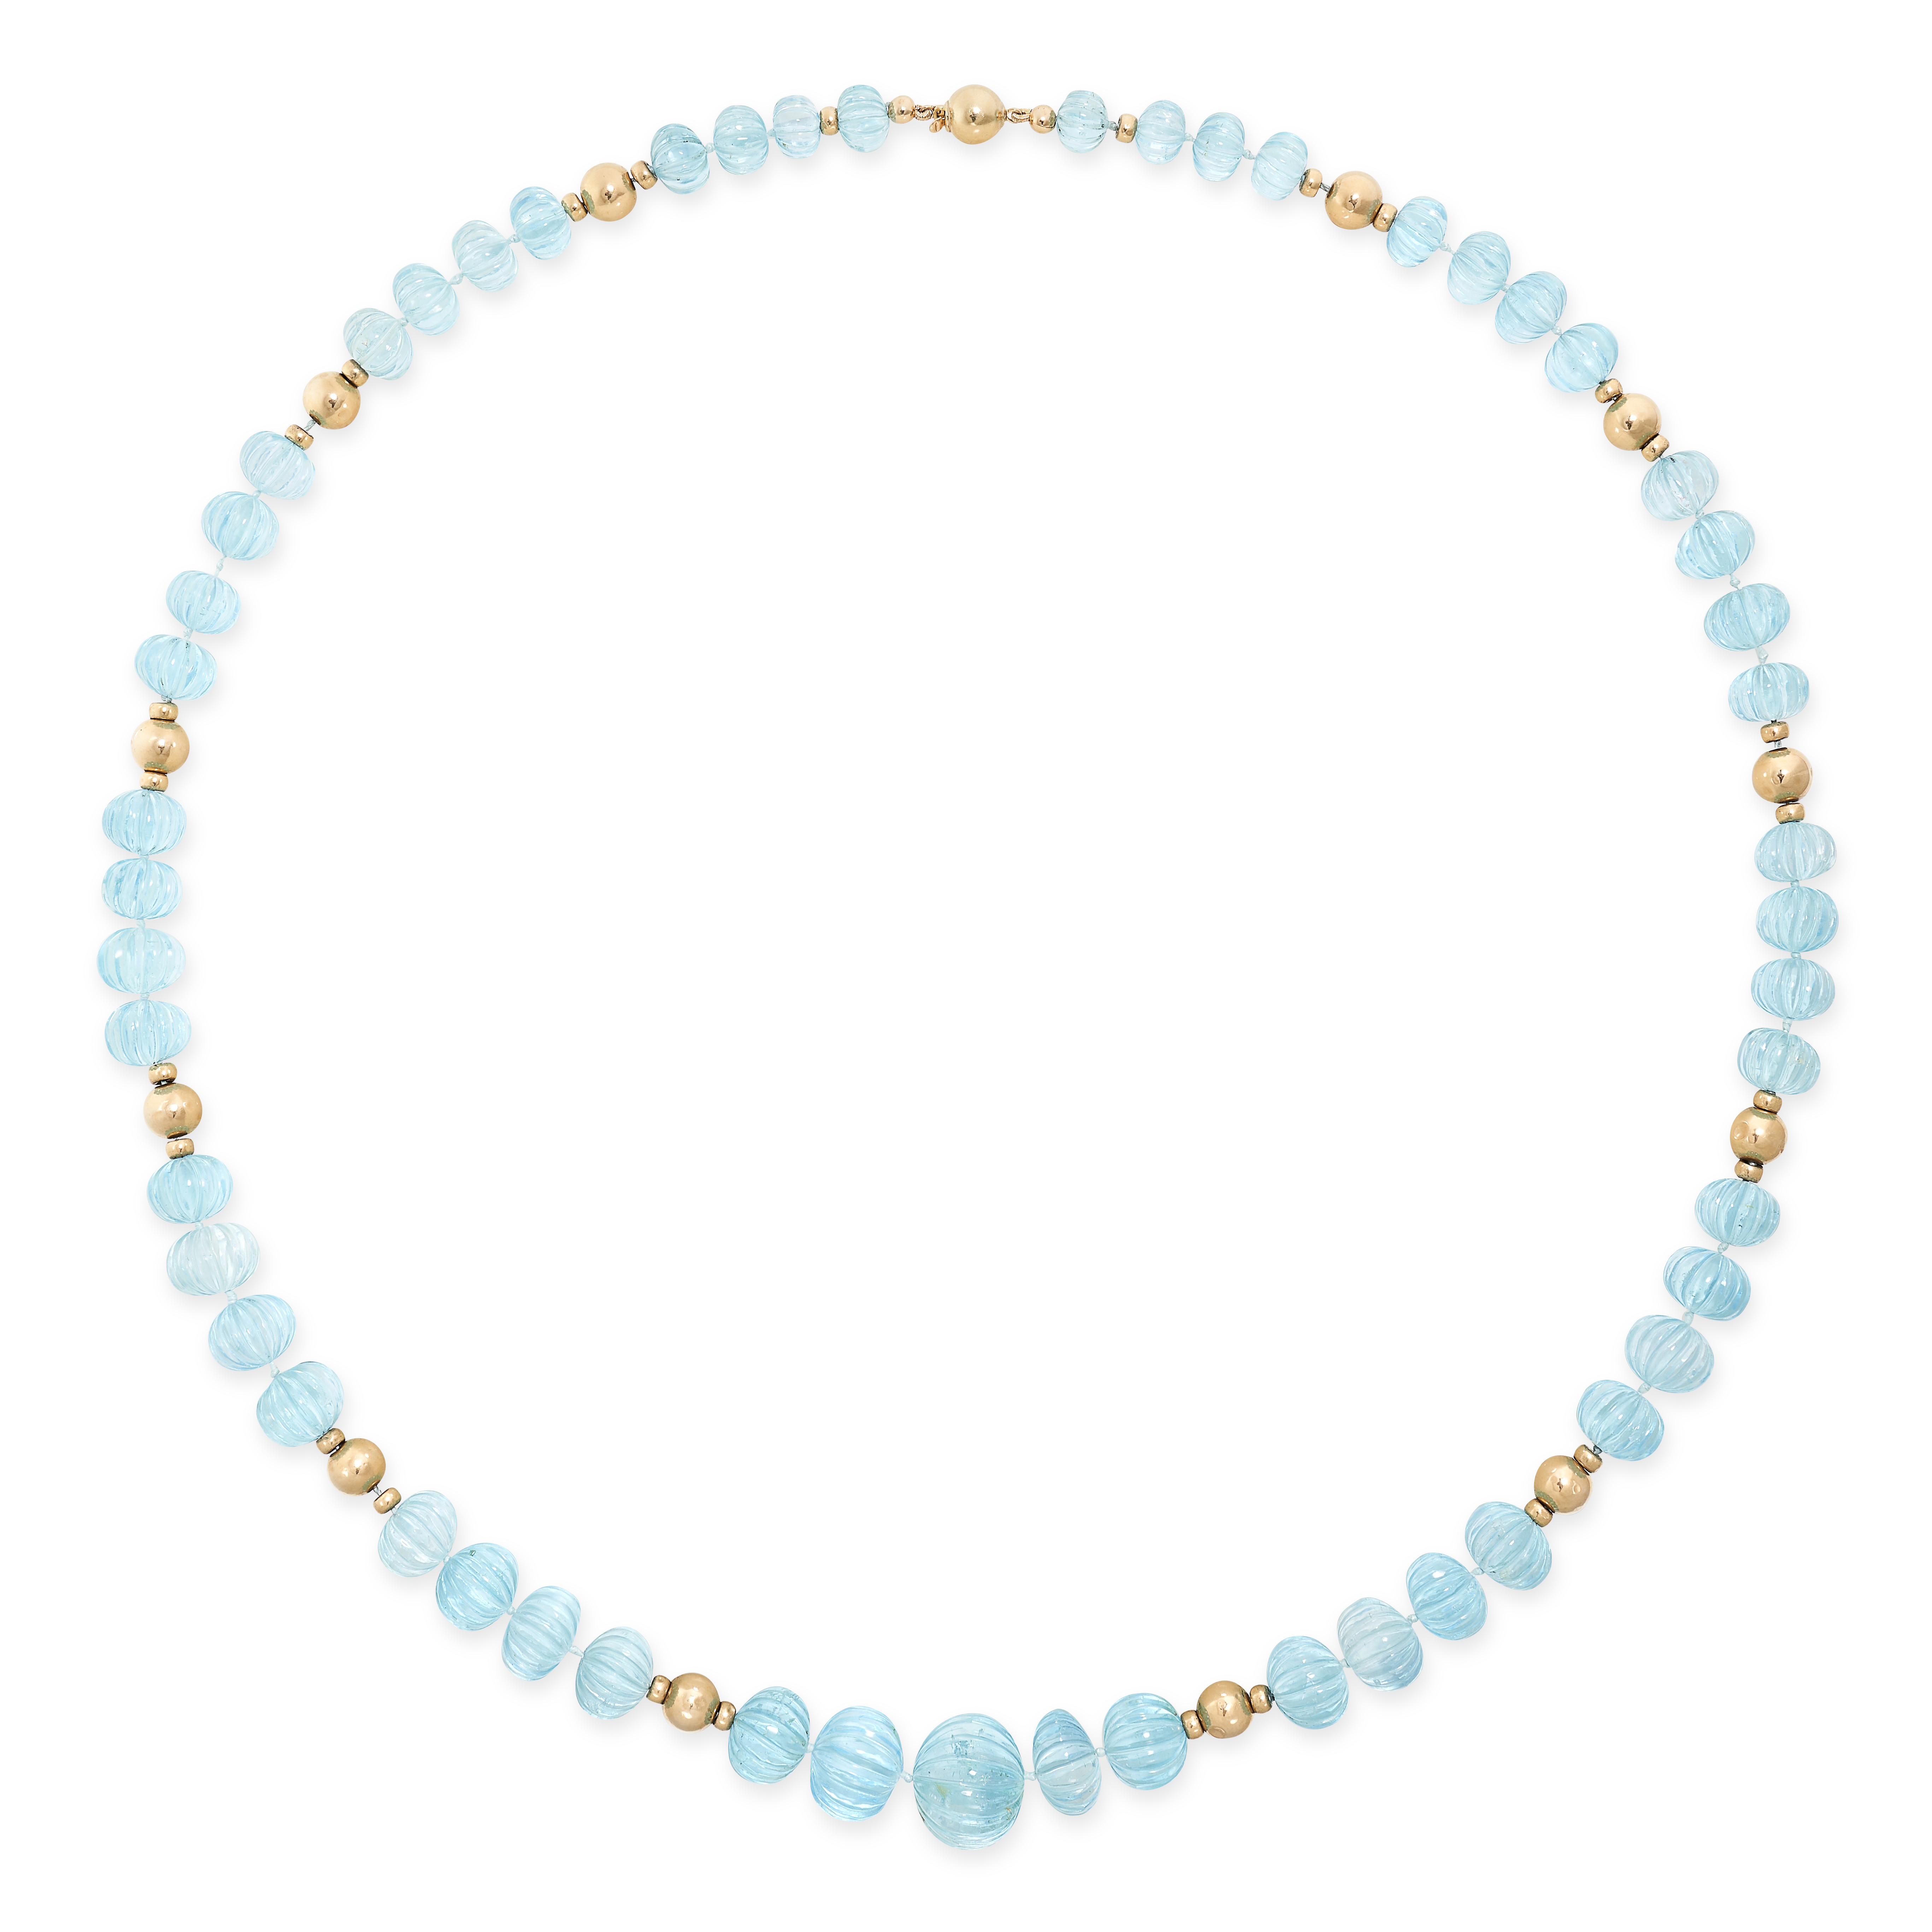 A BLUE TOPAZ AND GOLD BEAD NECKLACE in 14ct yellow gold, set with a single row of graduated carved